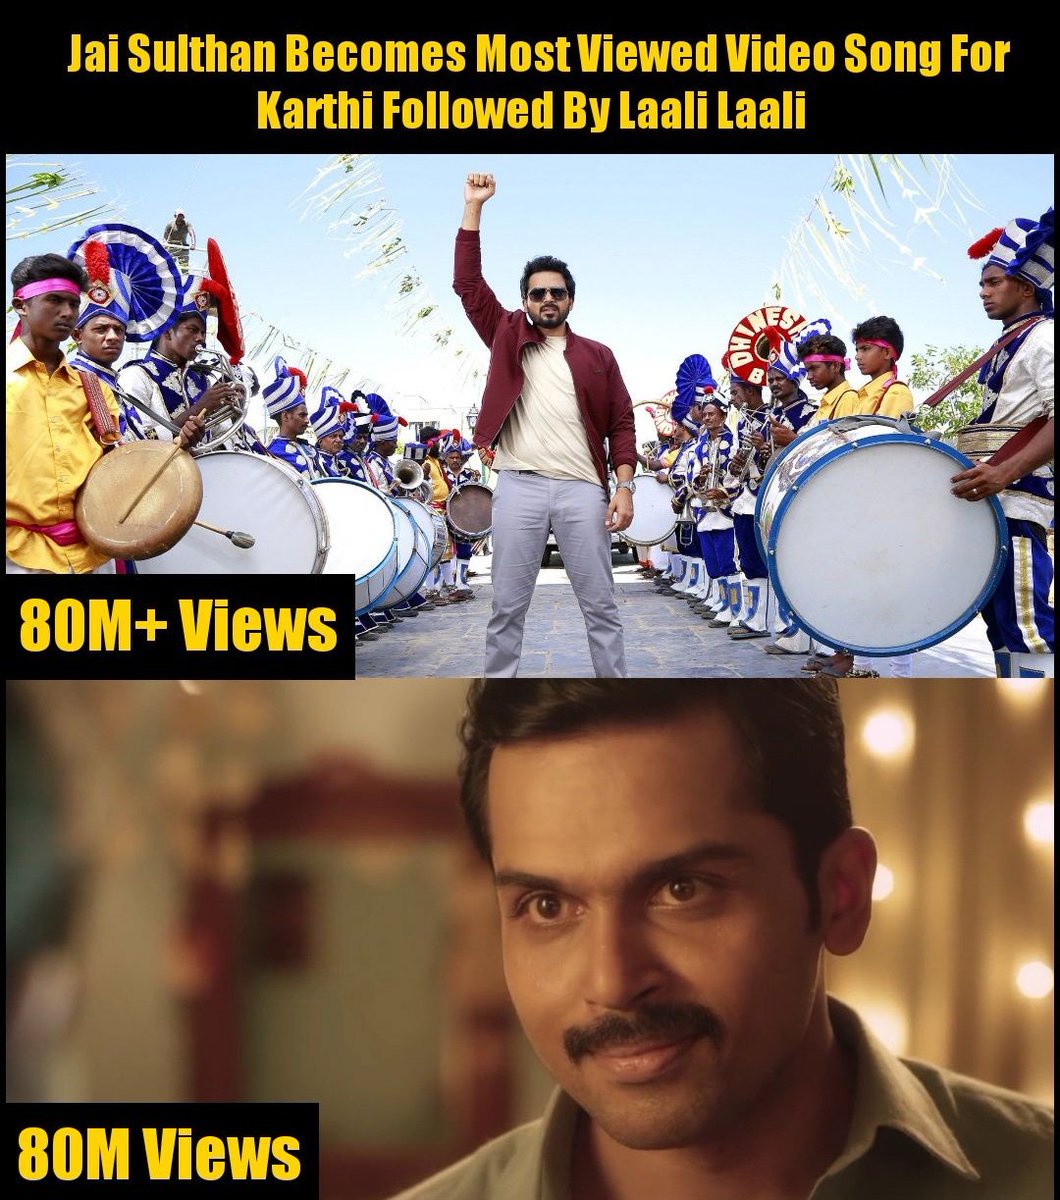 #JaiSulthan Becomes Most Viewed Video Song For @Karthi_Offl Anna Followed By 'Laali Laali'
.
|#Viruman #Sardar #PonniyinSelvan 
#Sulthan |